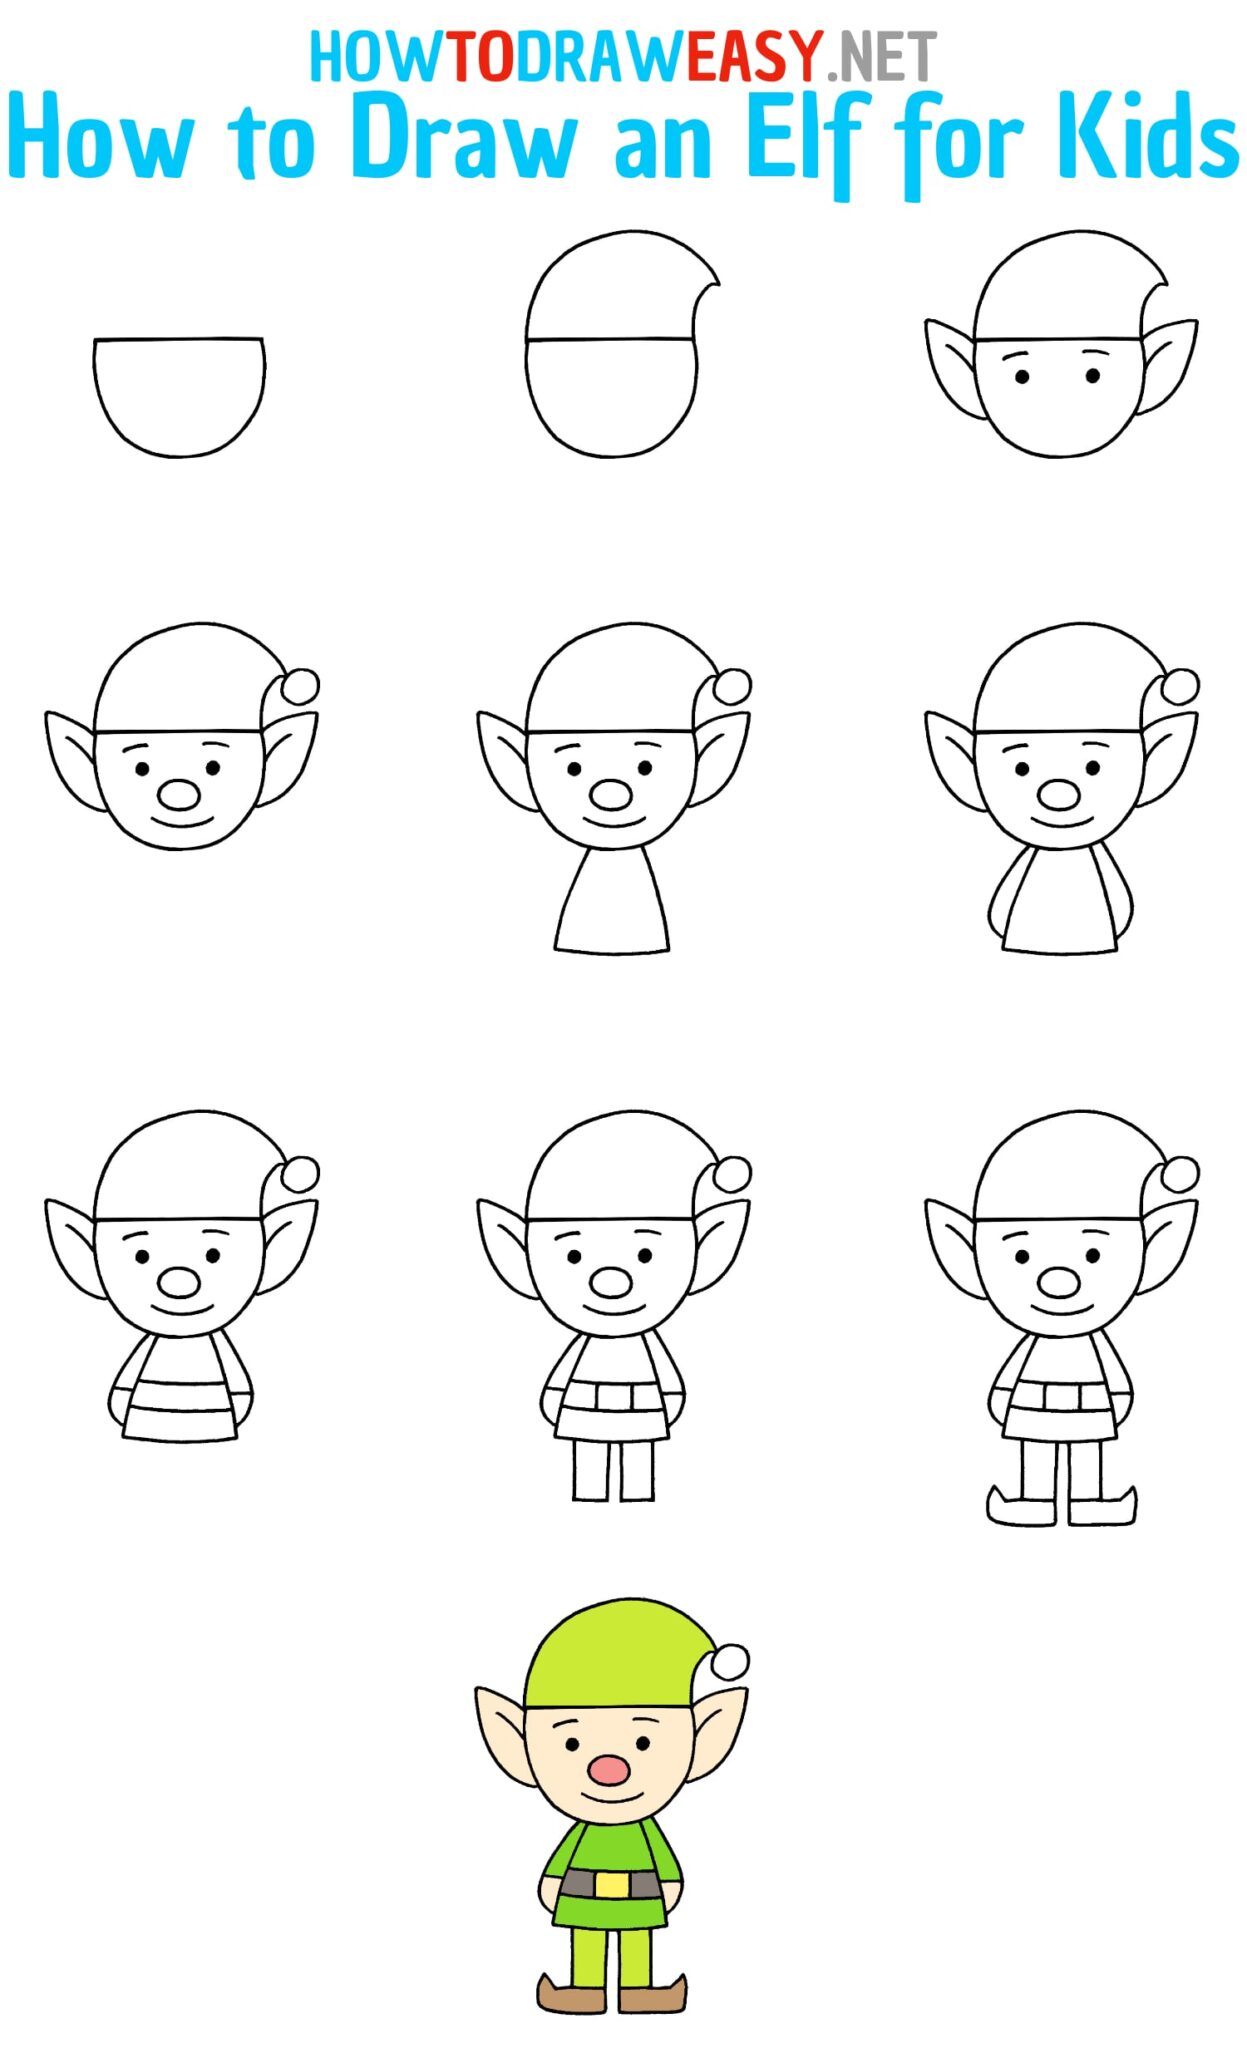 How to Draw an Elf for Kids How to Draw Easy